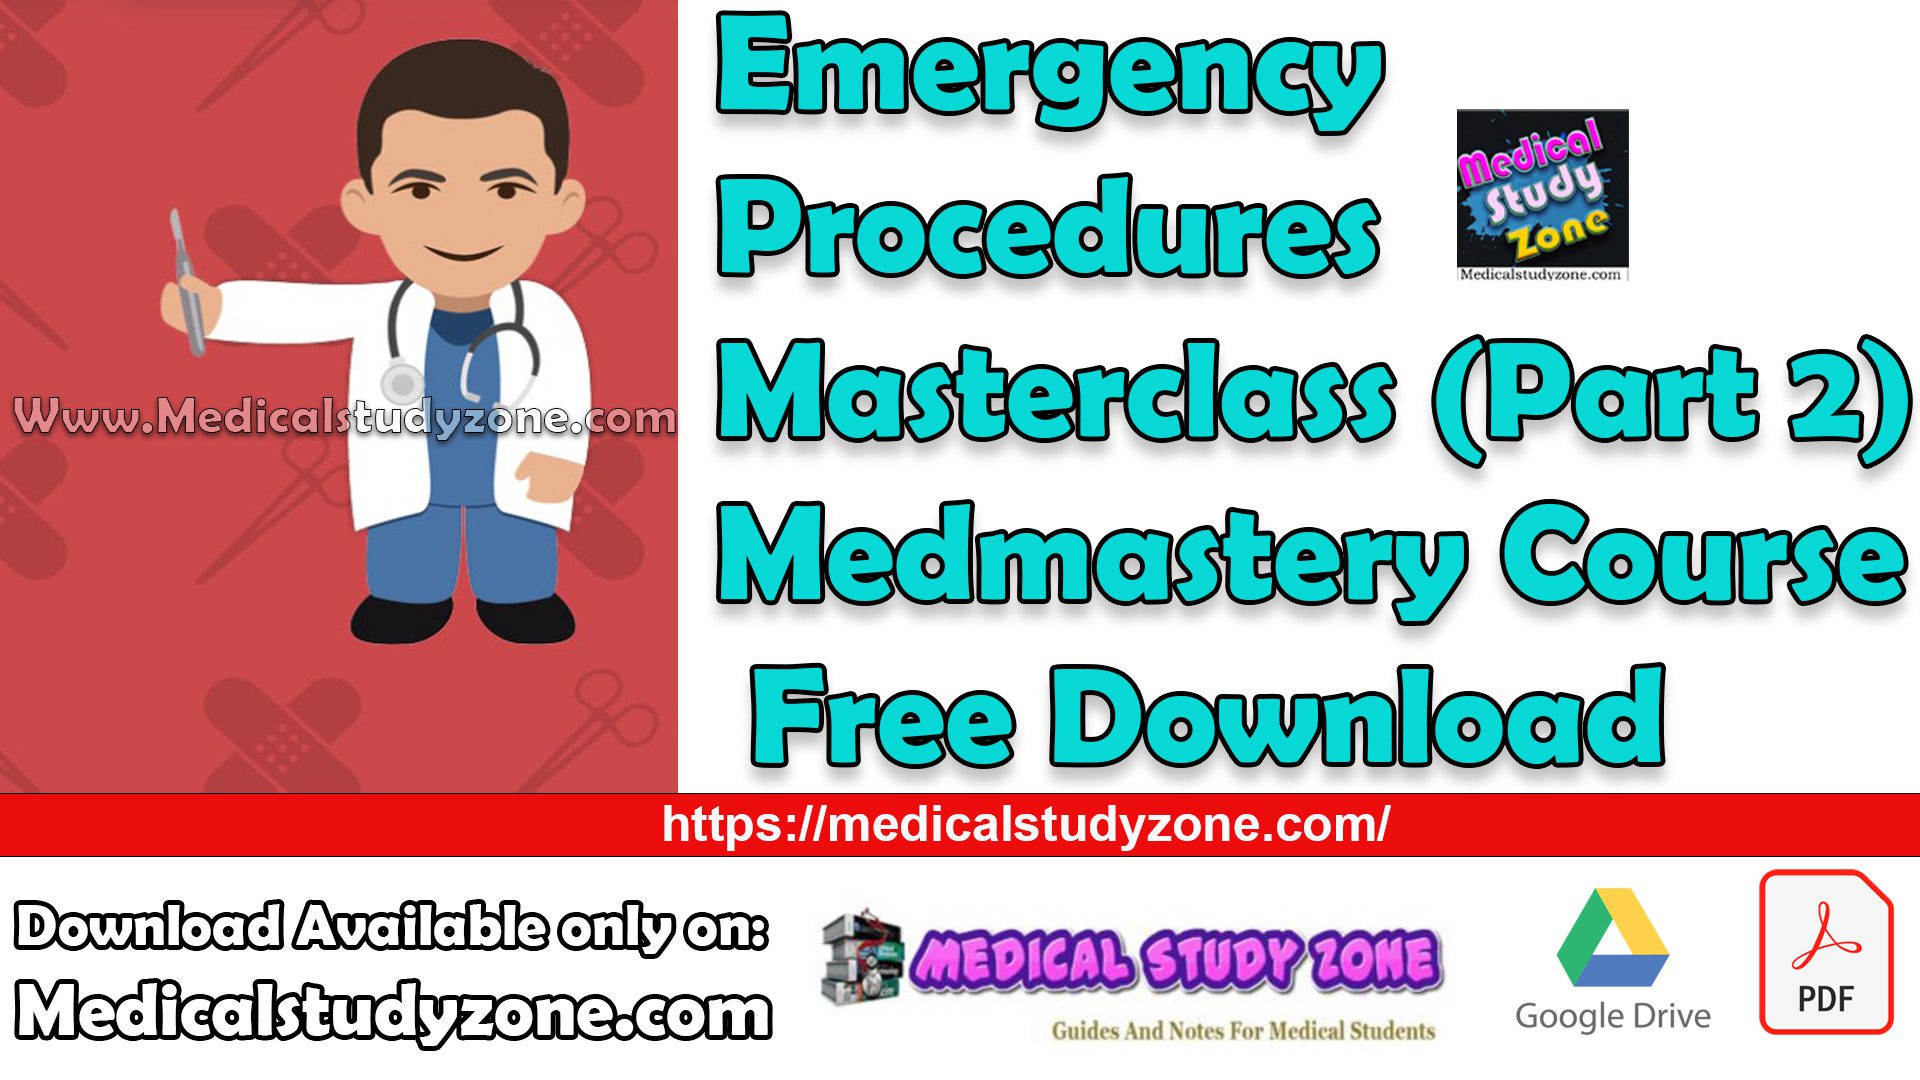 Emergency Procedures Masterclass (Part 2) Medmastery Course Free Download